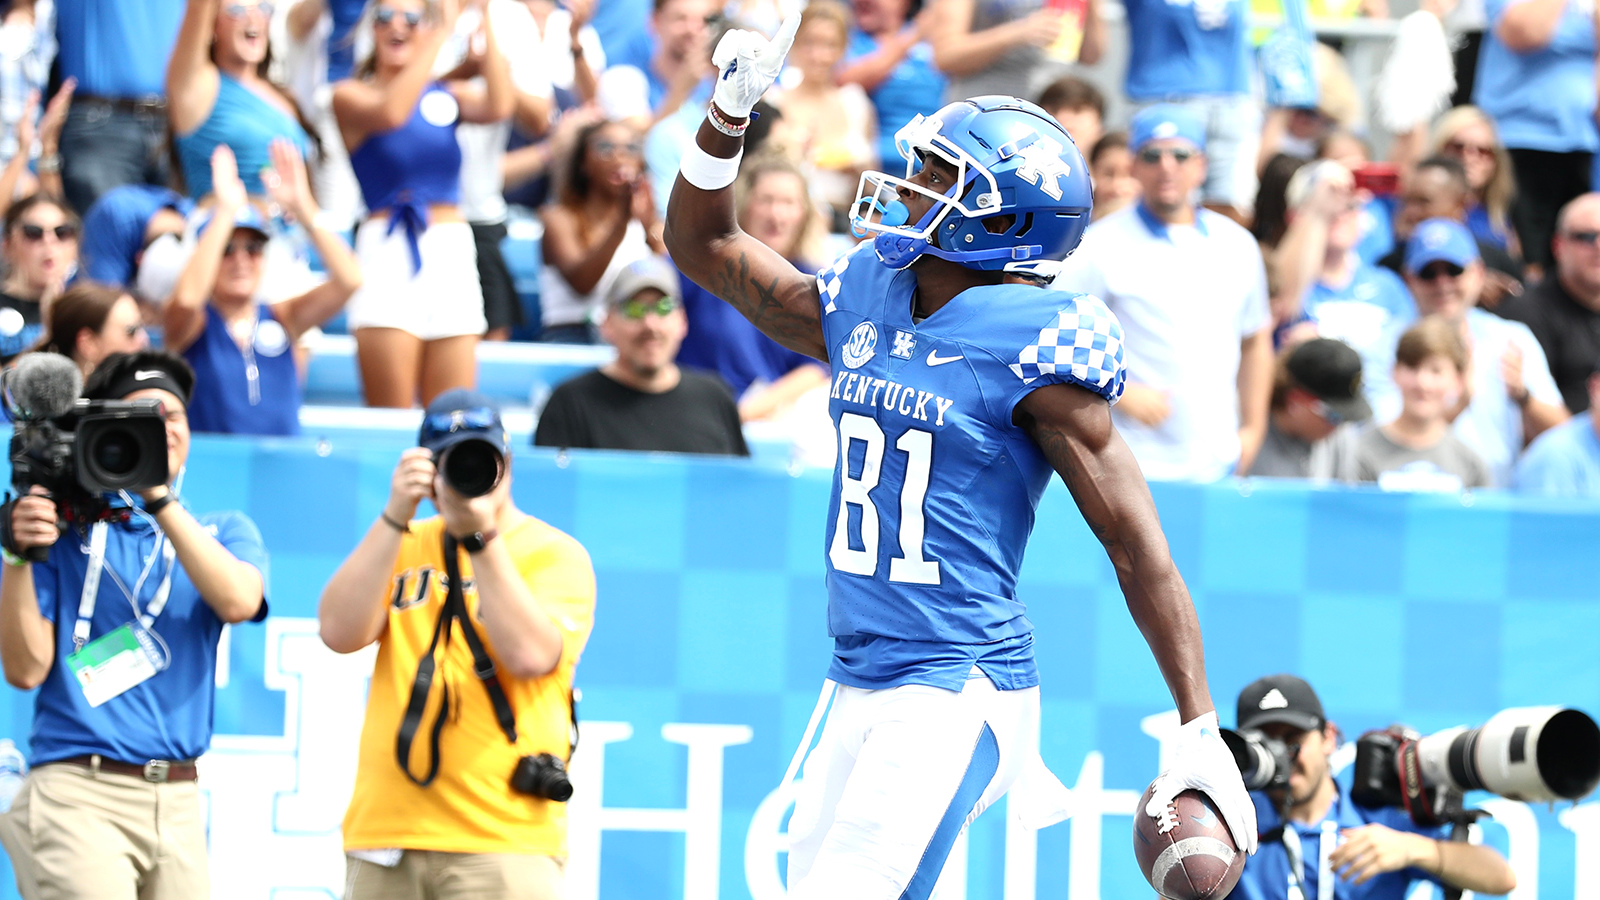 Kentucky Holds Off Chattanooga on Saturday